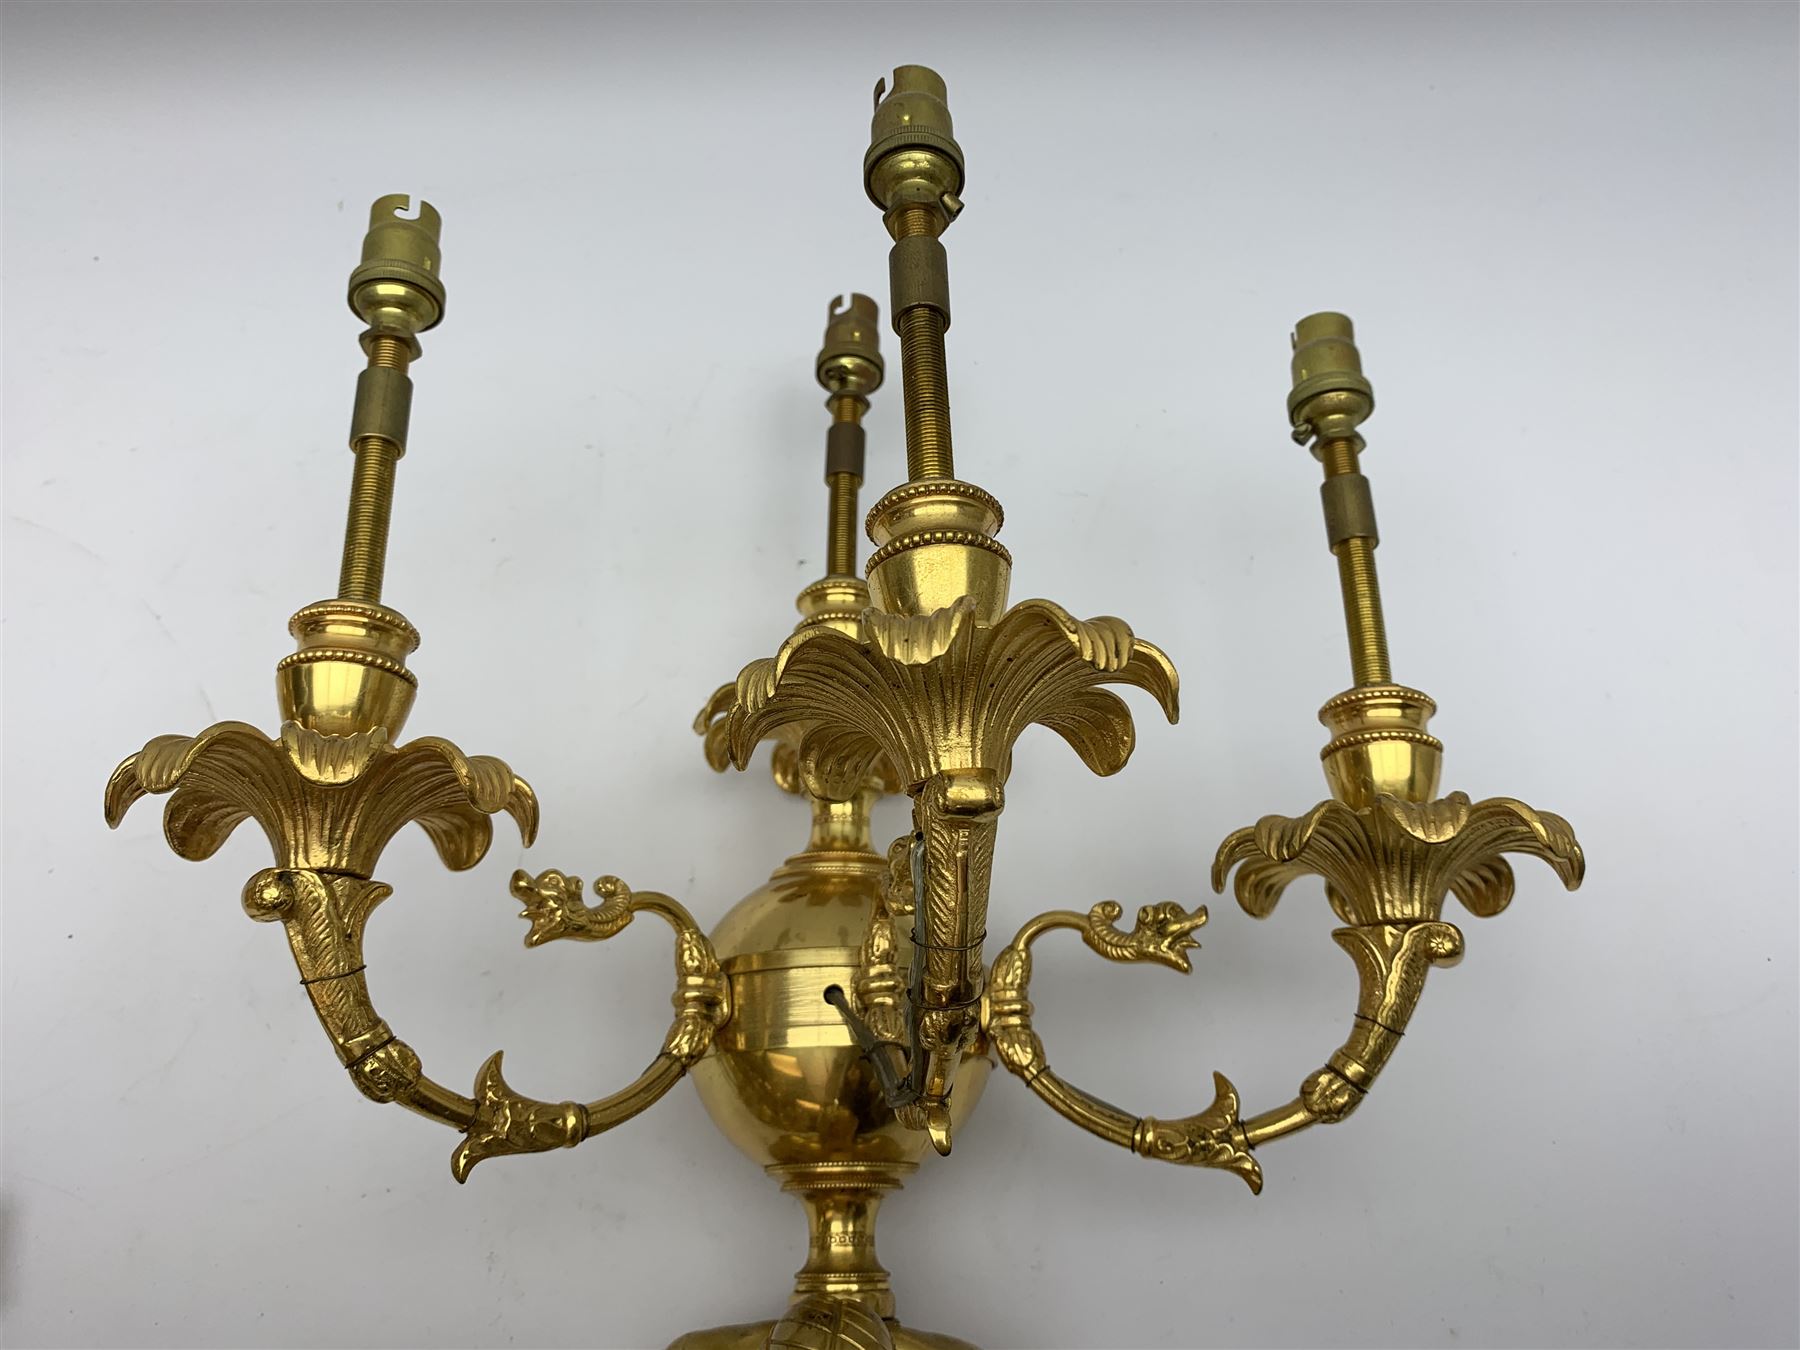 Pair of 19th century and later ormolu wall sconces - Image 4 of 6